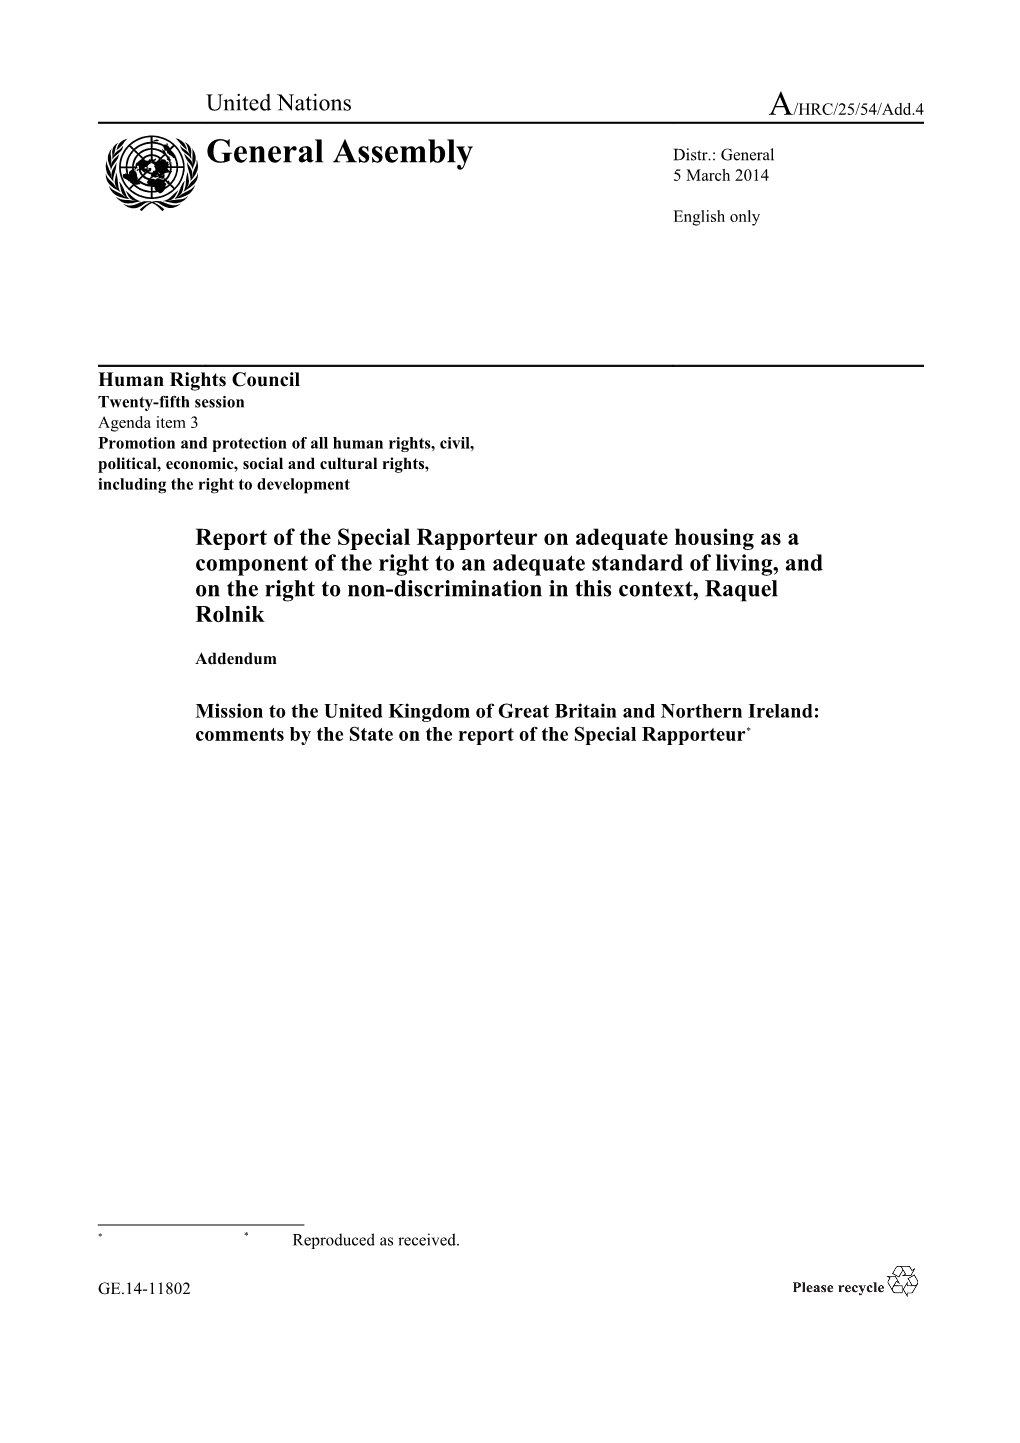 Report Of The Special Rapporteur On The Situation Of Human Rights Defenders - Mission To United Kingdom Of Great Britain And Northern Ireland In English